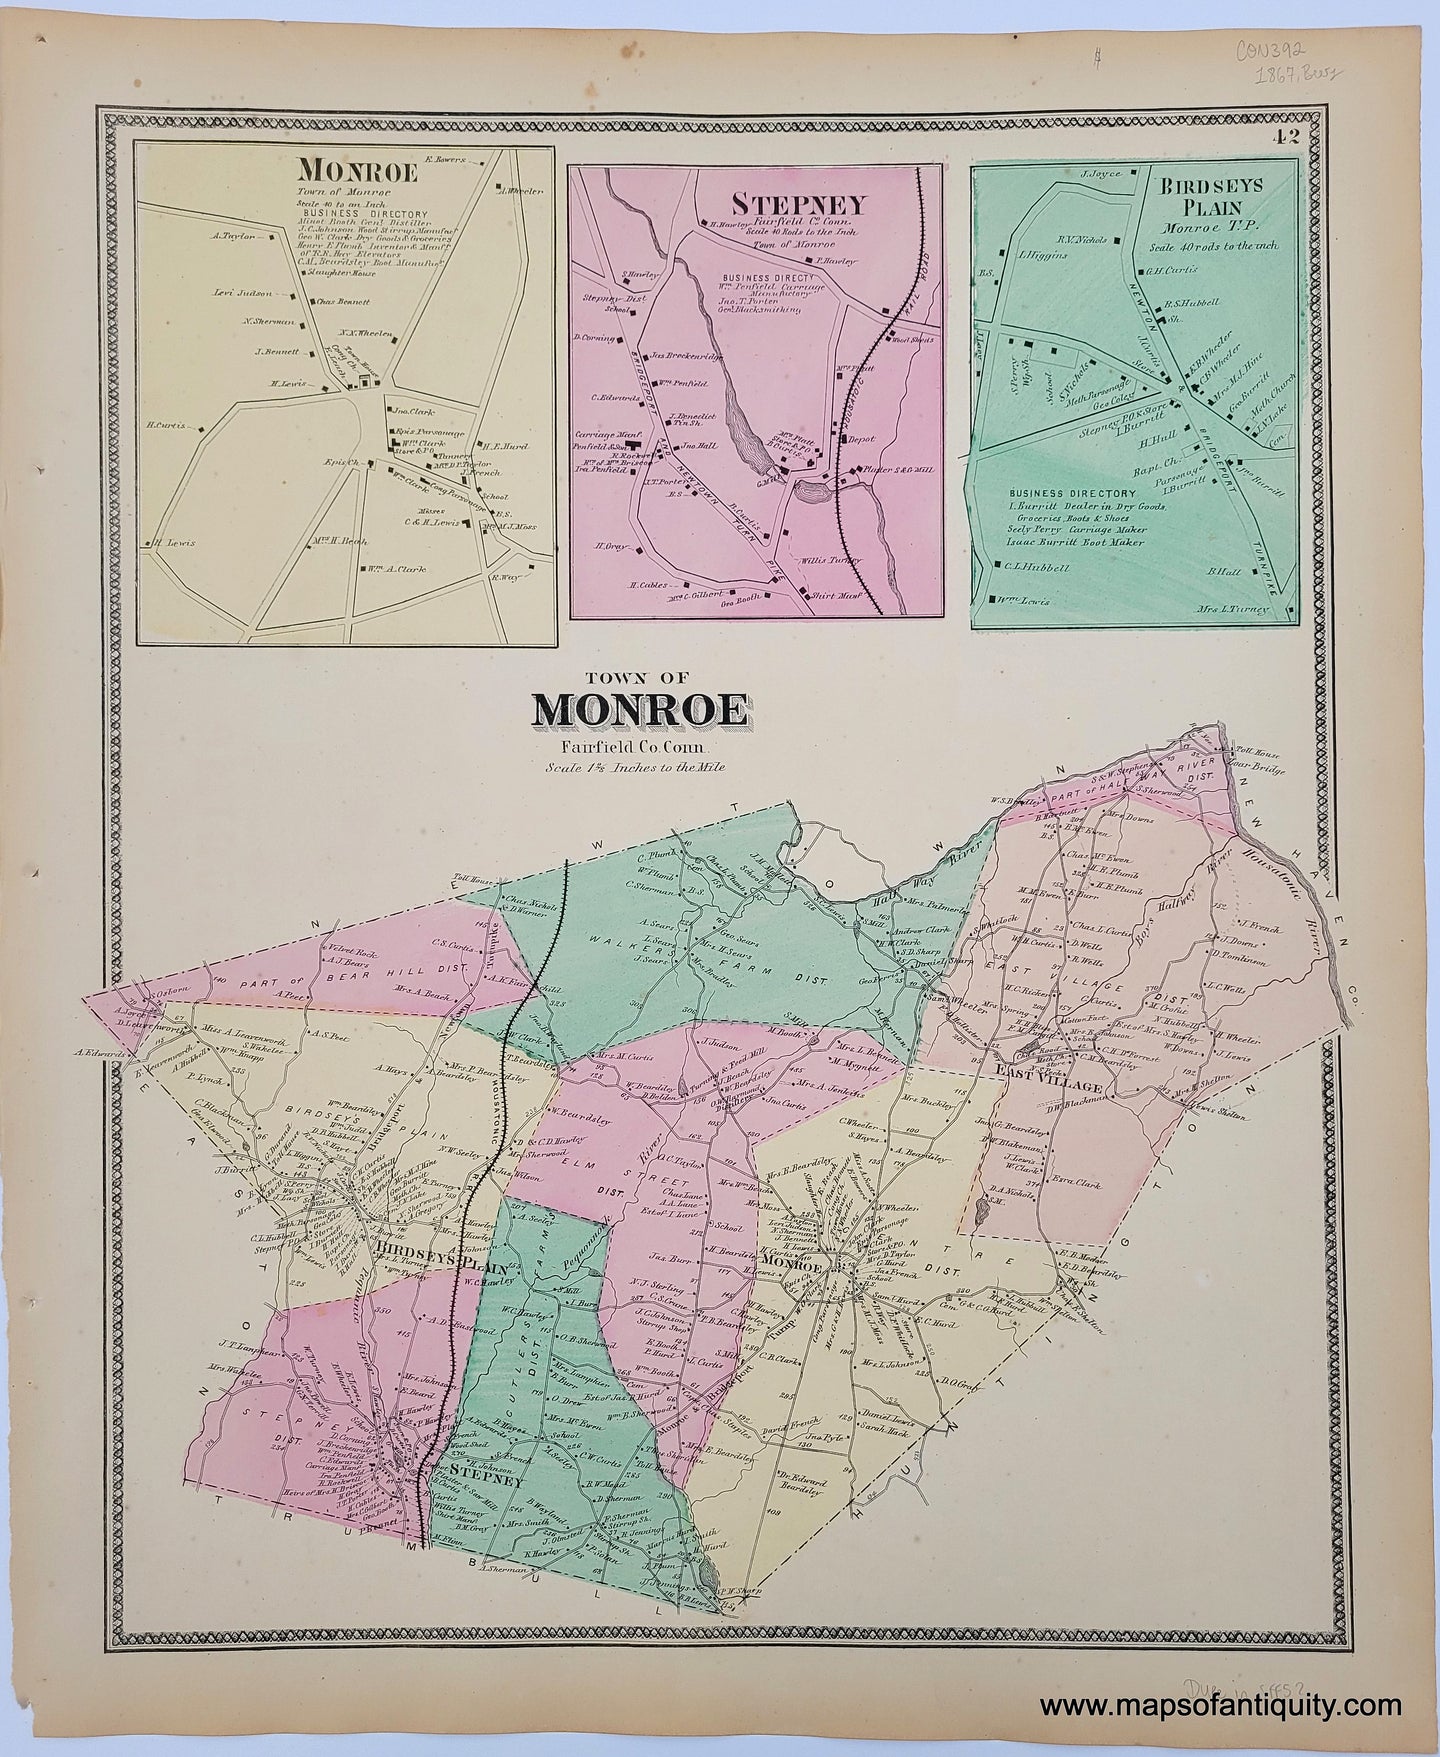 Antique-Hand-Colored-Map-Town-of-Monroe-(With-Monroe-Stepney-and-Birdseys-Plain)-United-States-Northeast-1867-Beers-Maps-Of-Antiquity